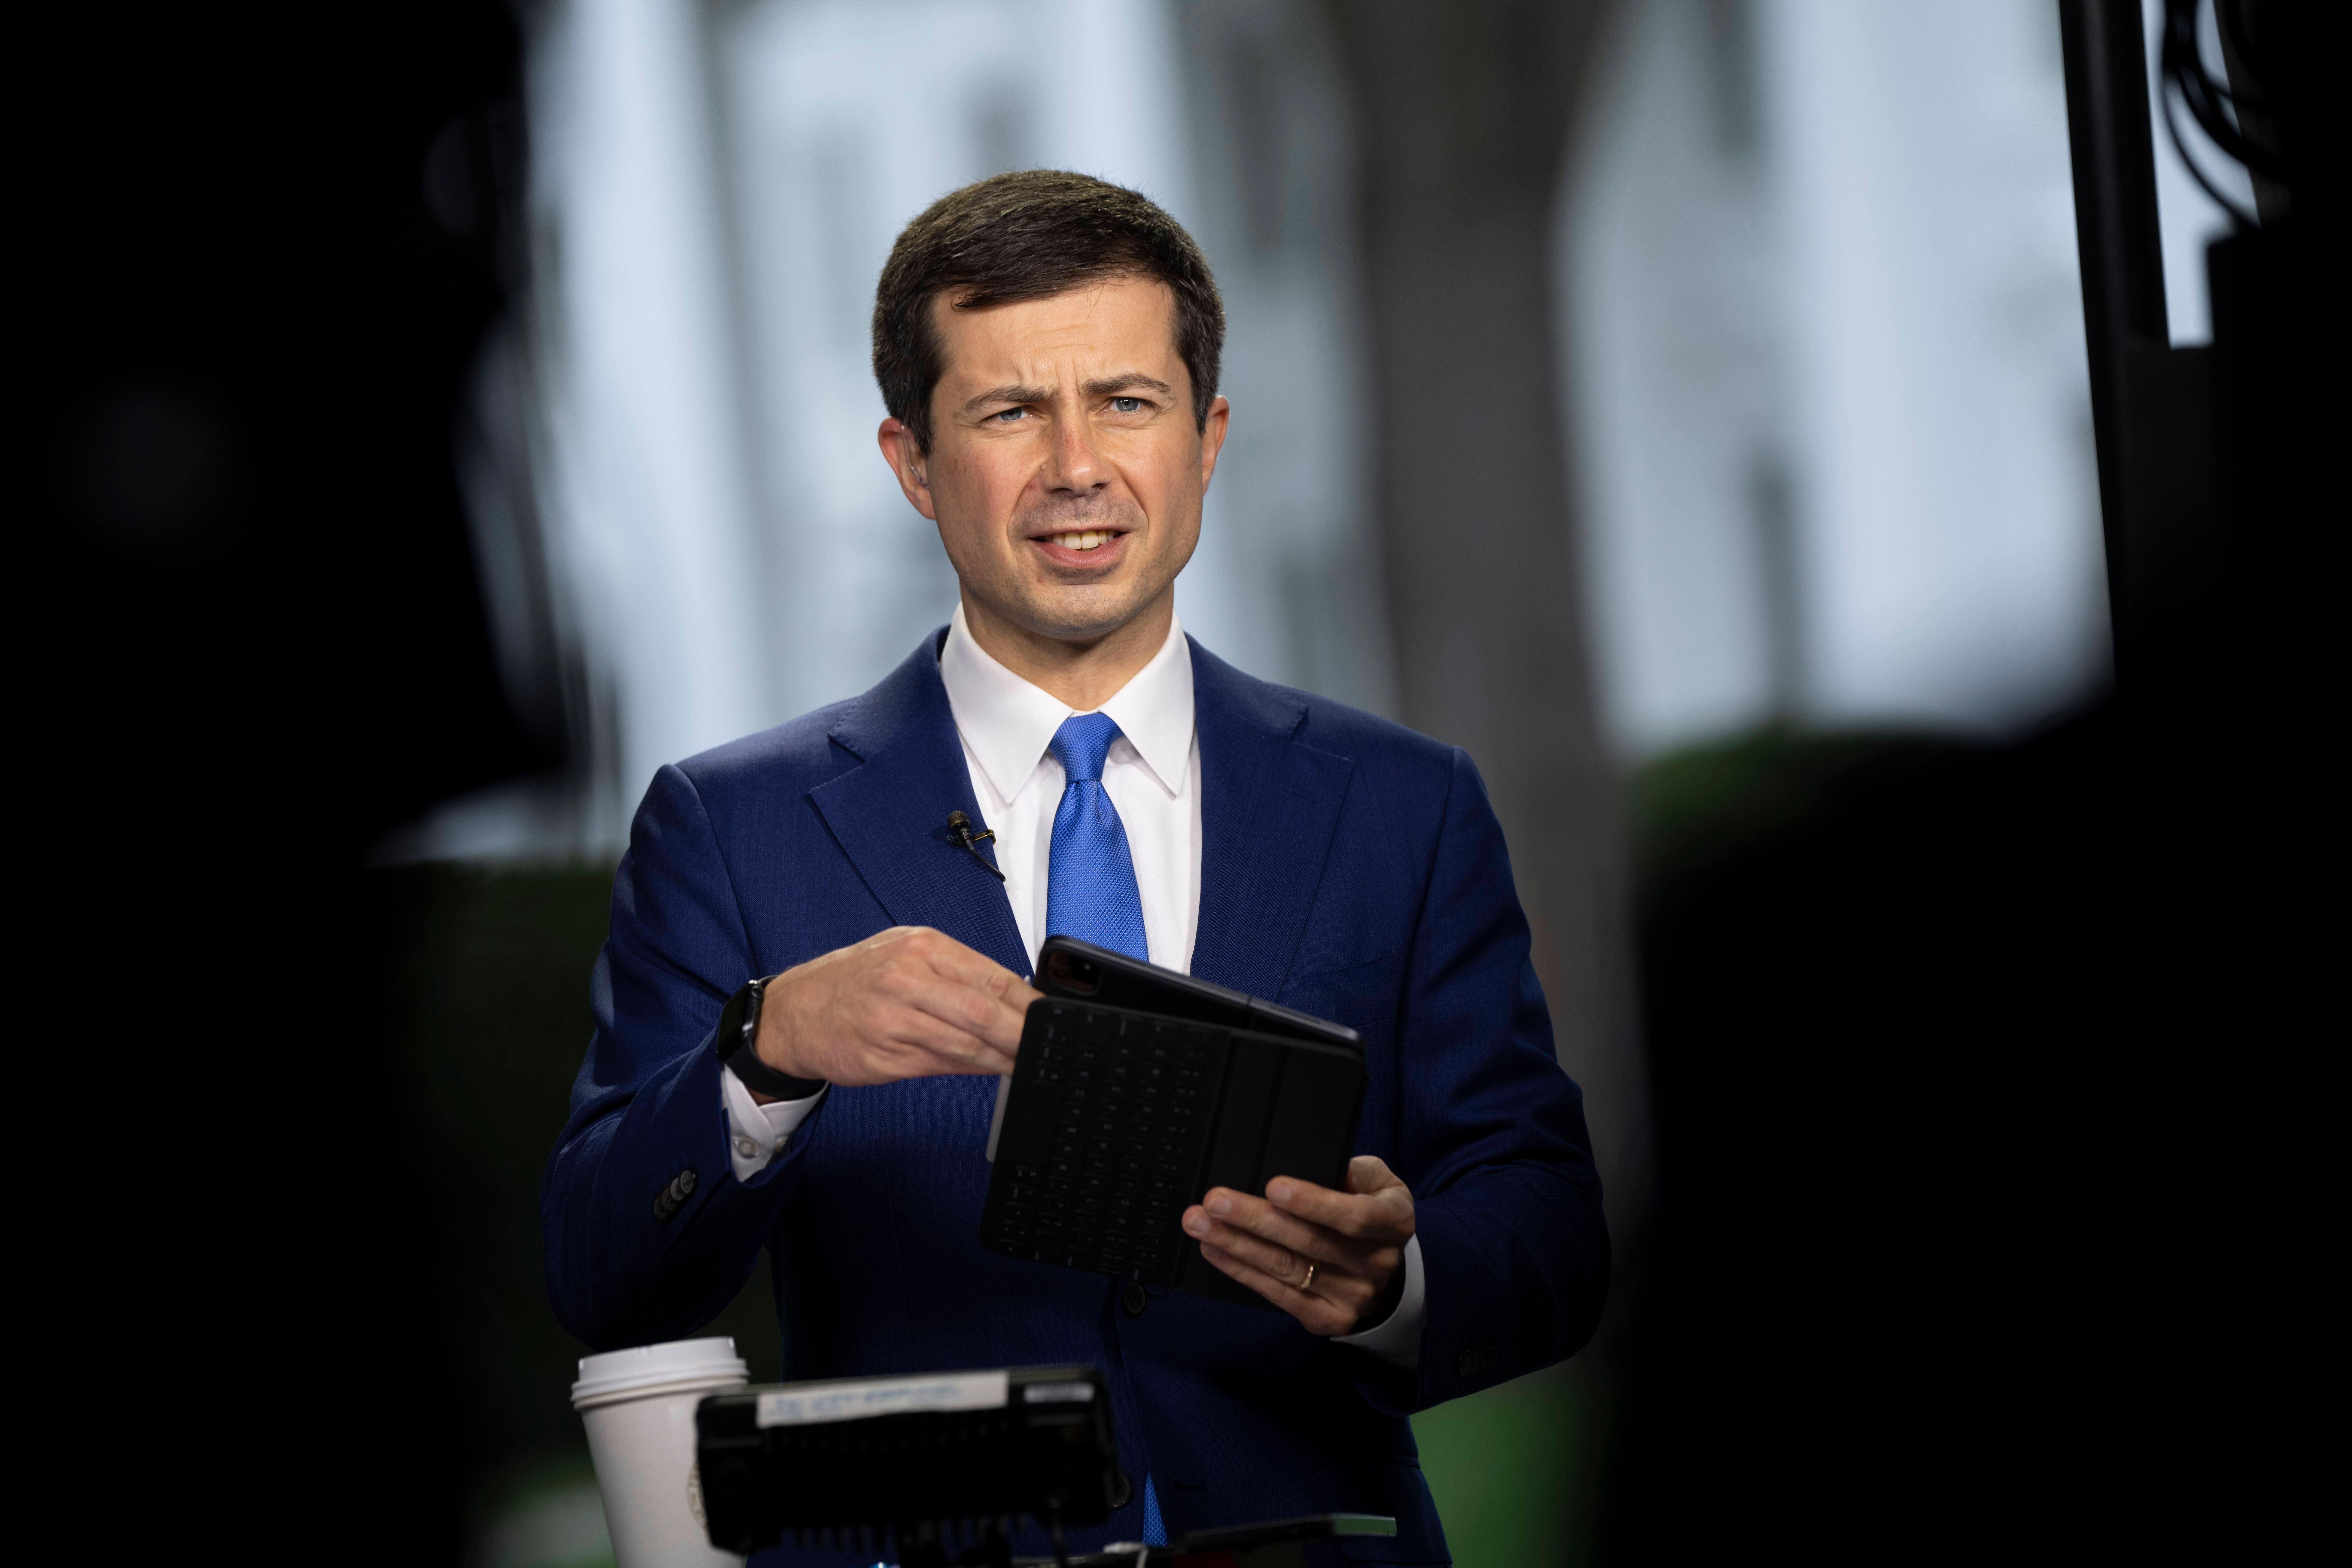 United States Secretary of Transportation Pete Buttigieg participates in a television interview at the White House